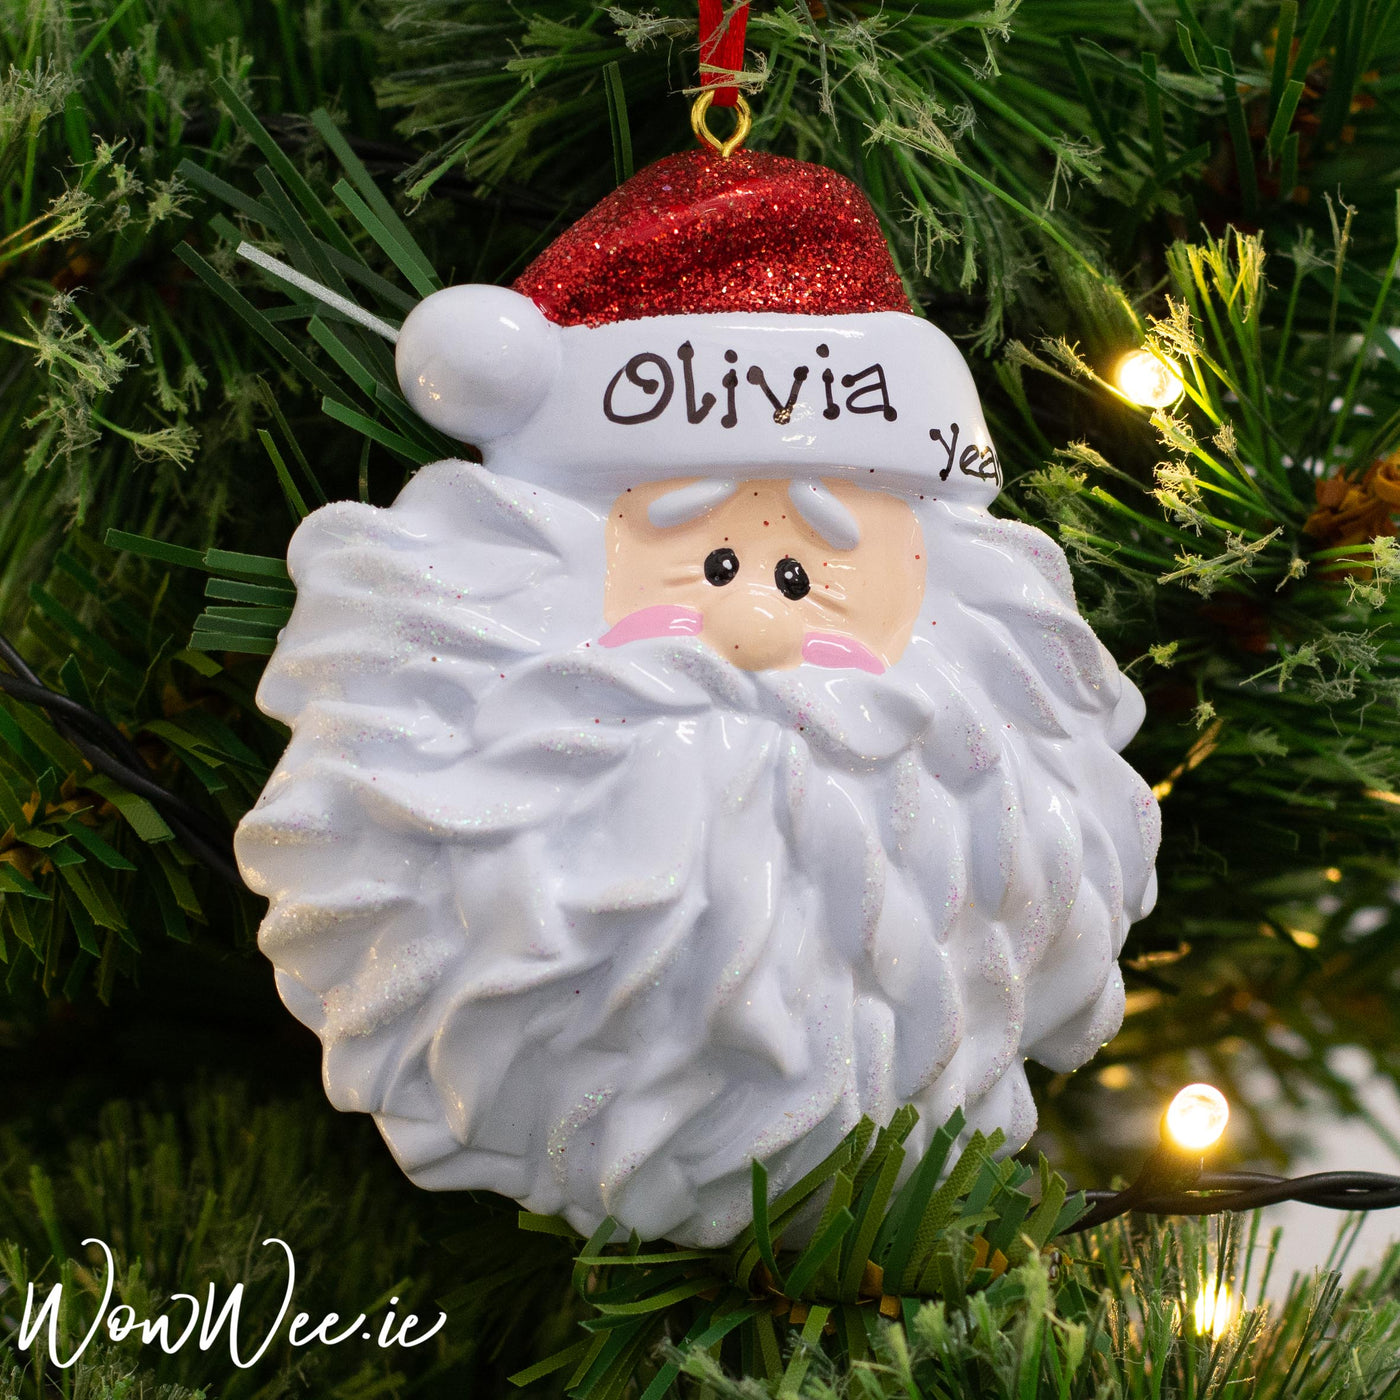 Festive and fun, this Santa Personalised Christmas Ornament is a gorgeous gift to give a special someone or family this year.